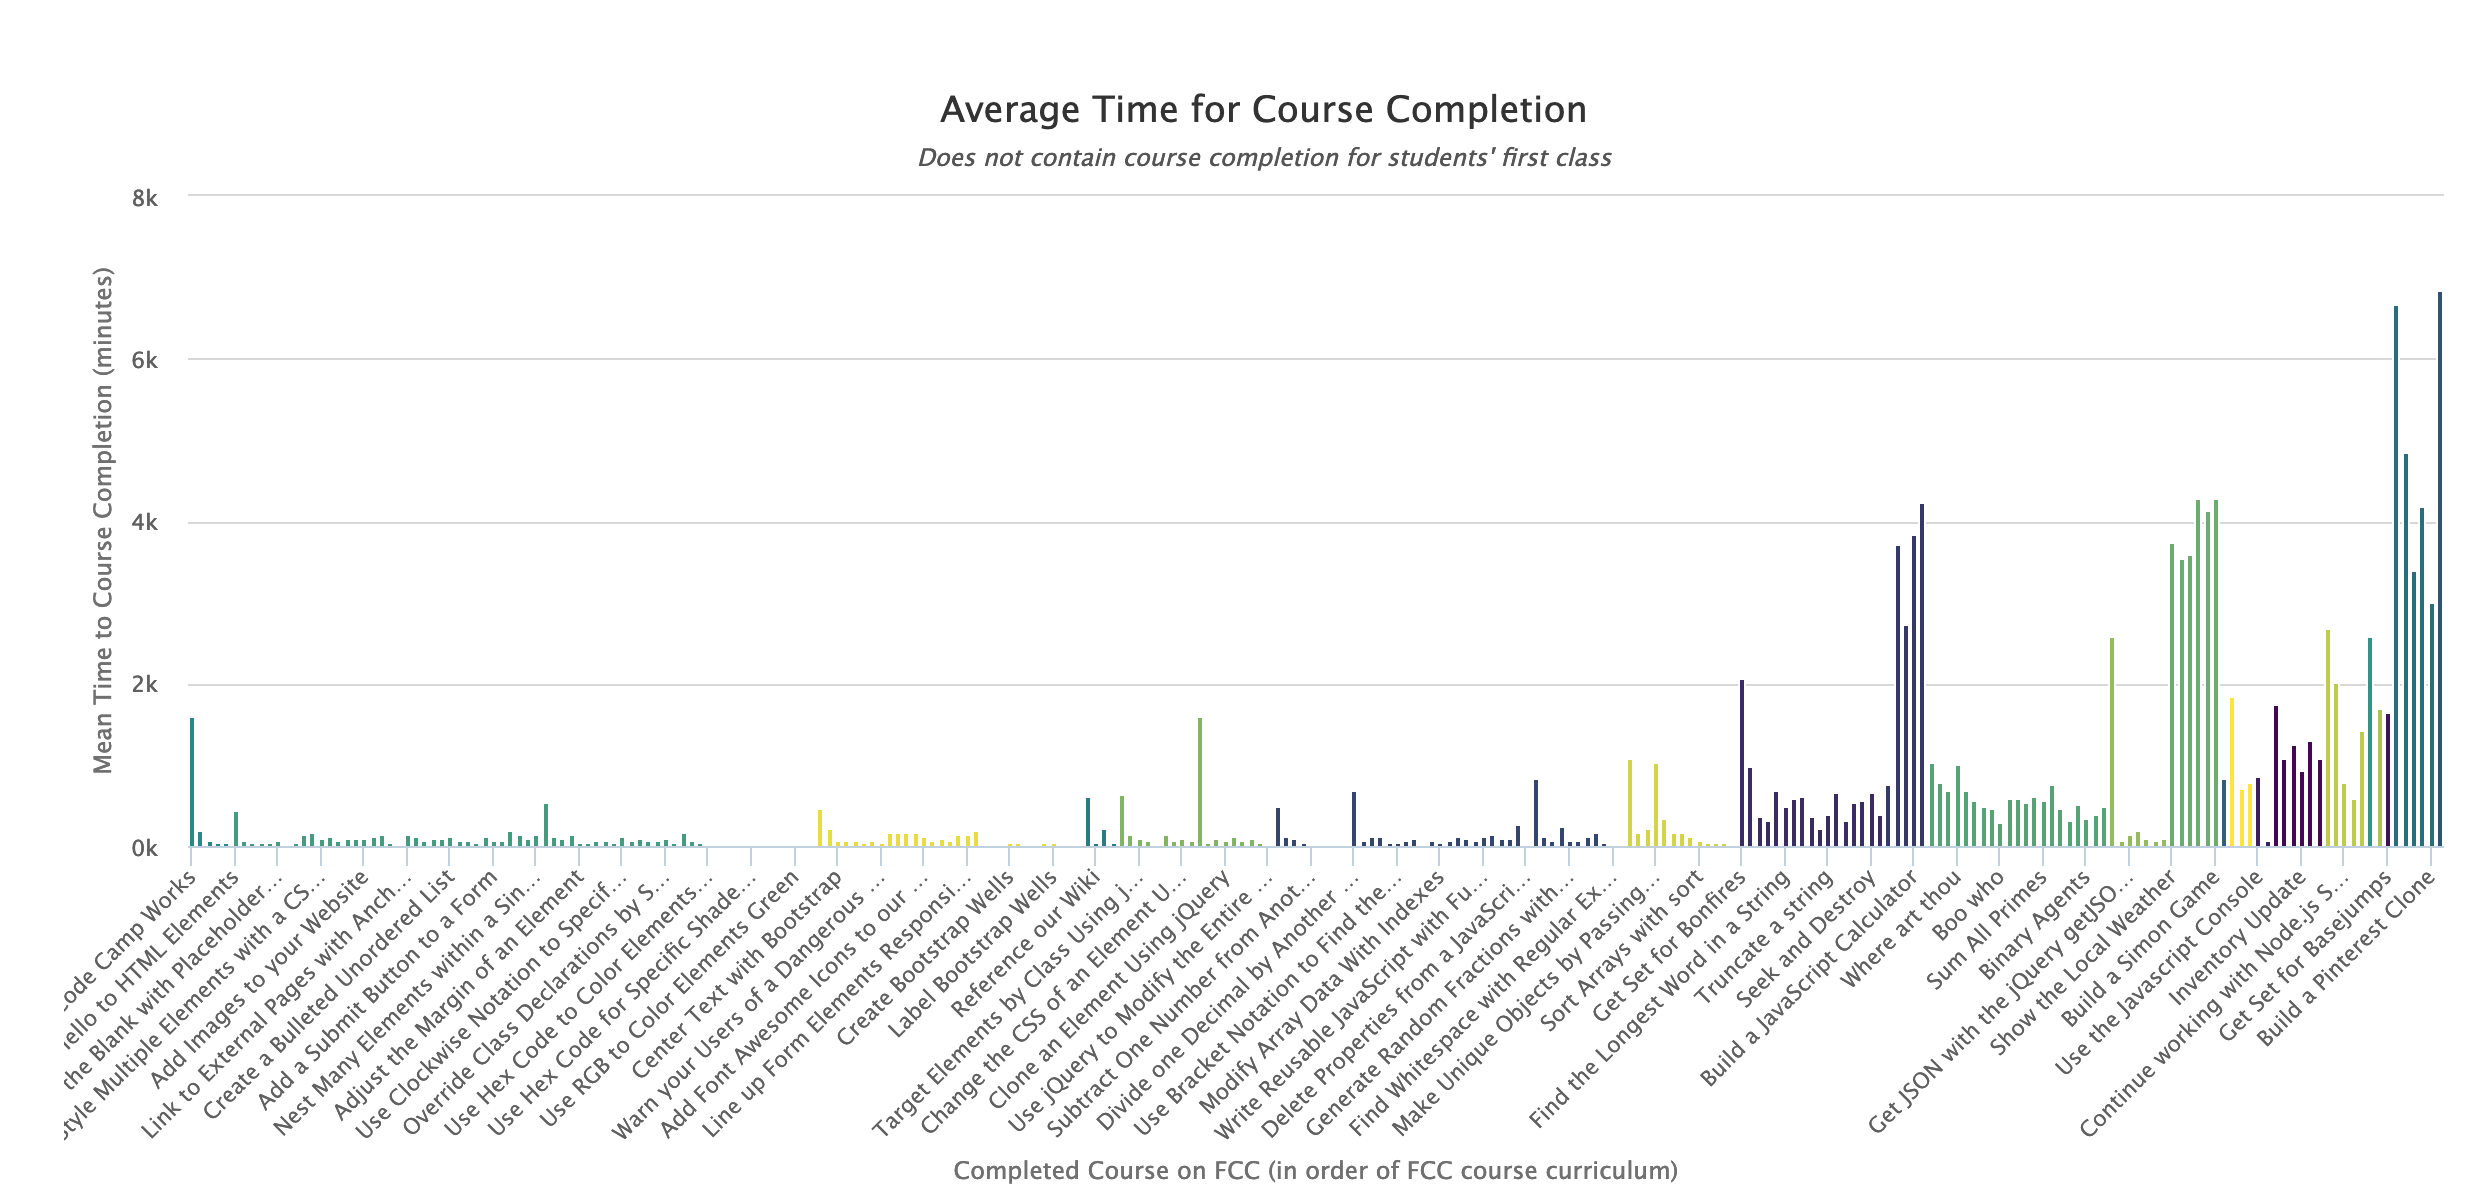 Bar graph showing the average time for course completion (in minutes) not including their first class.